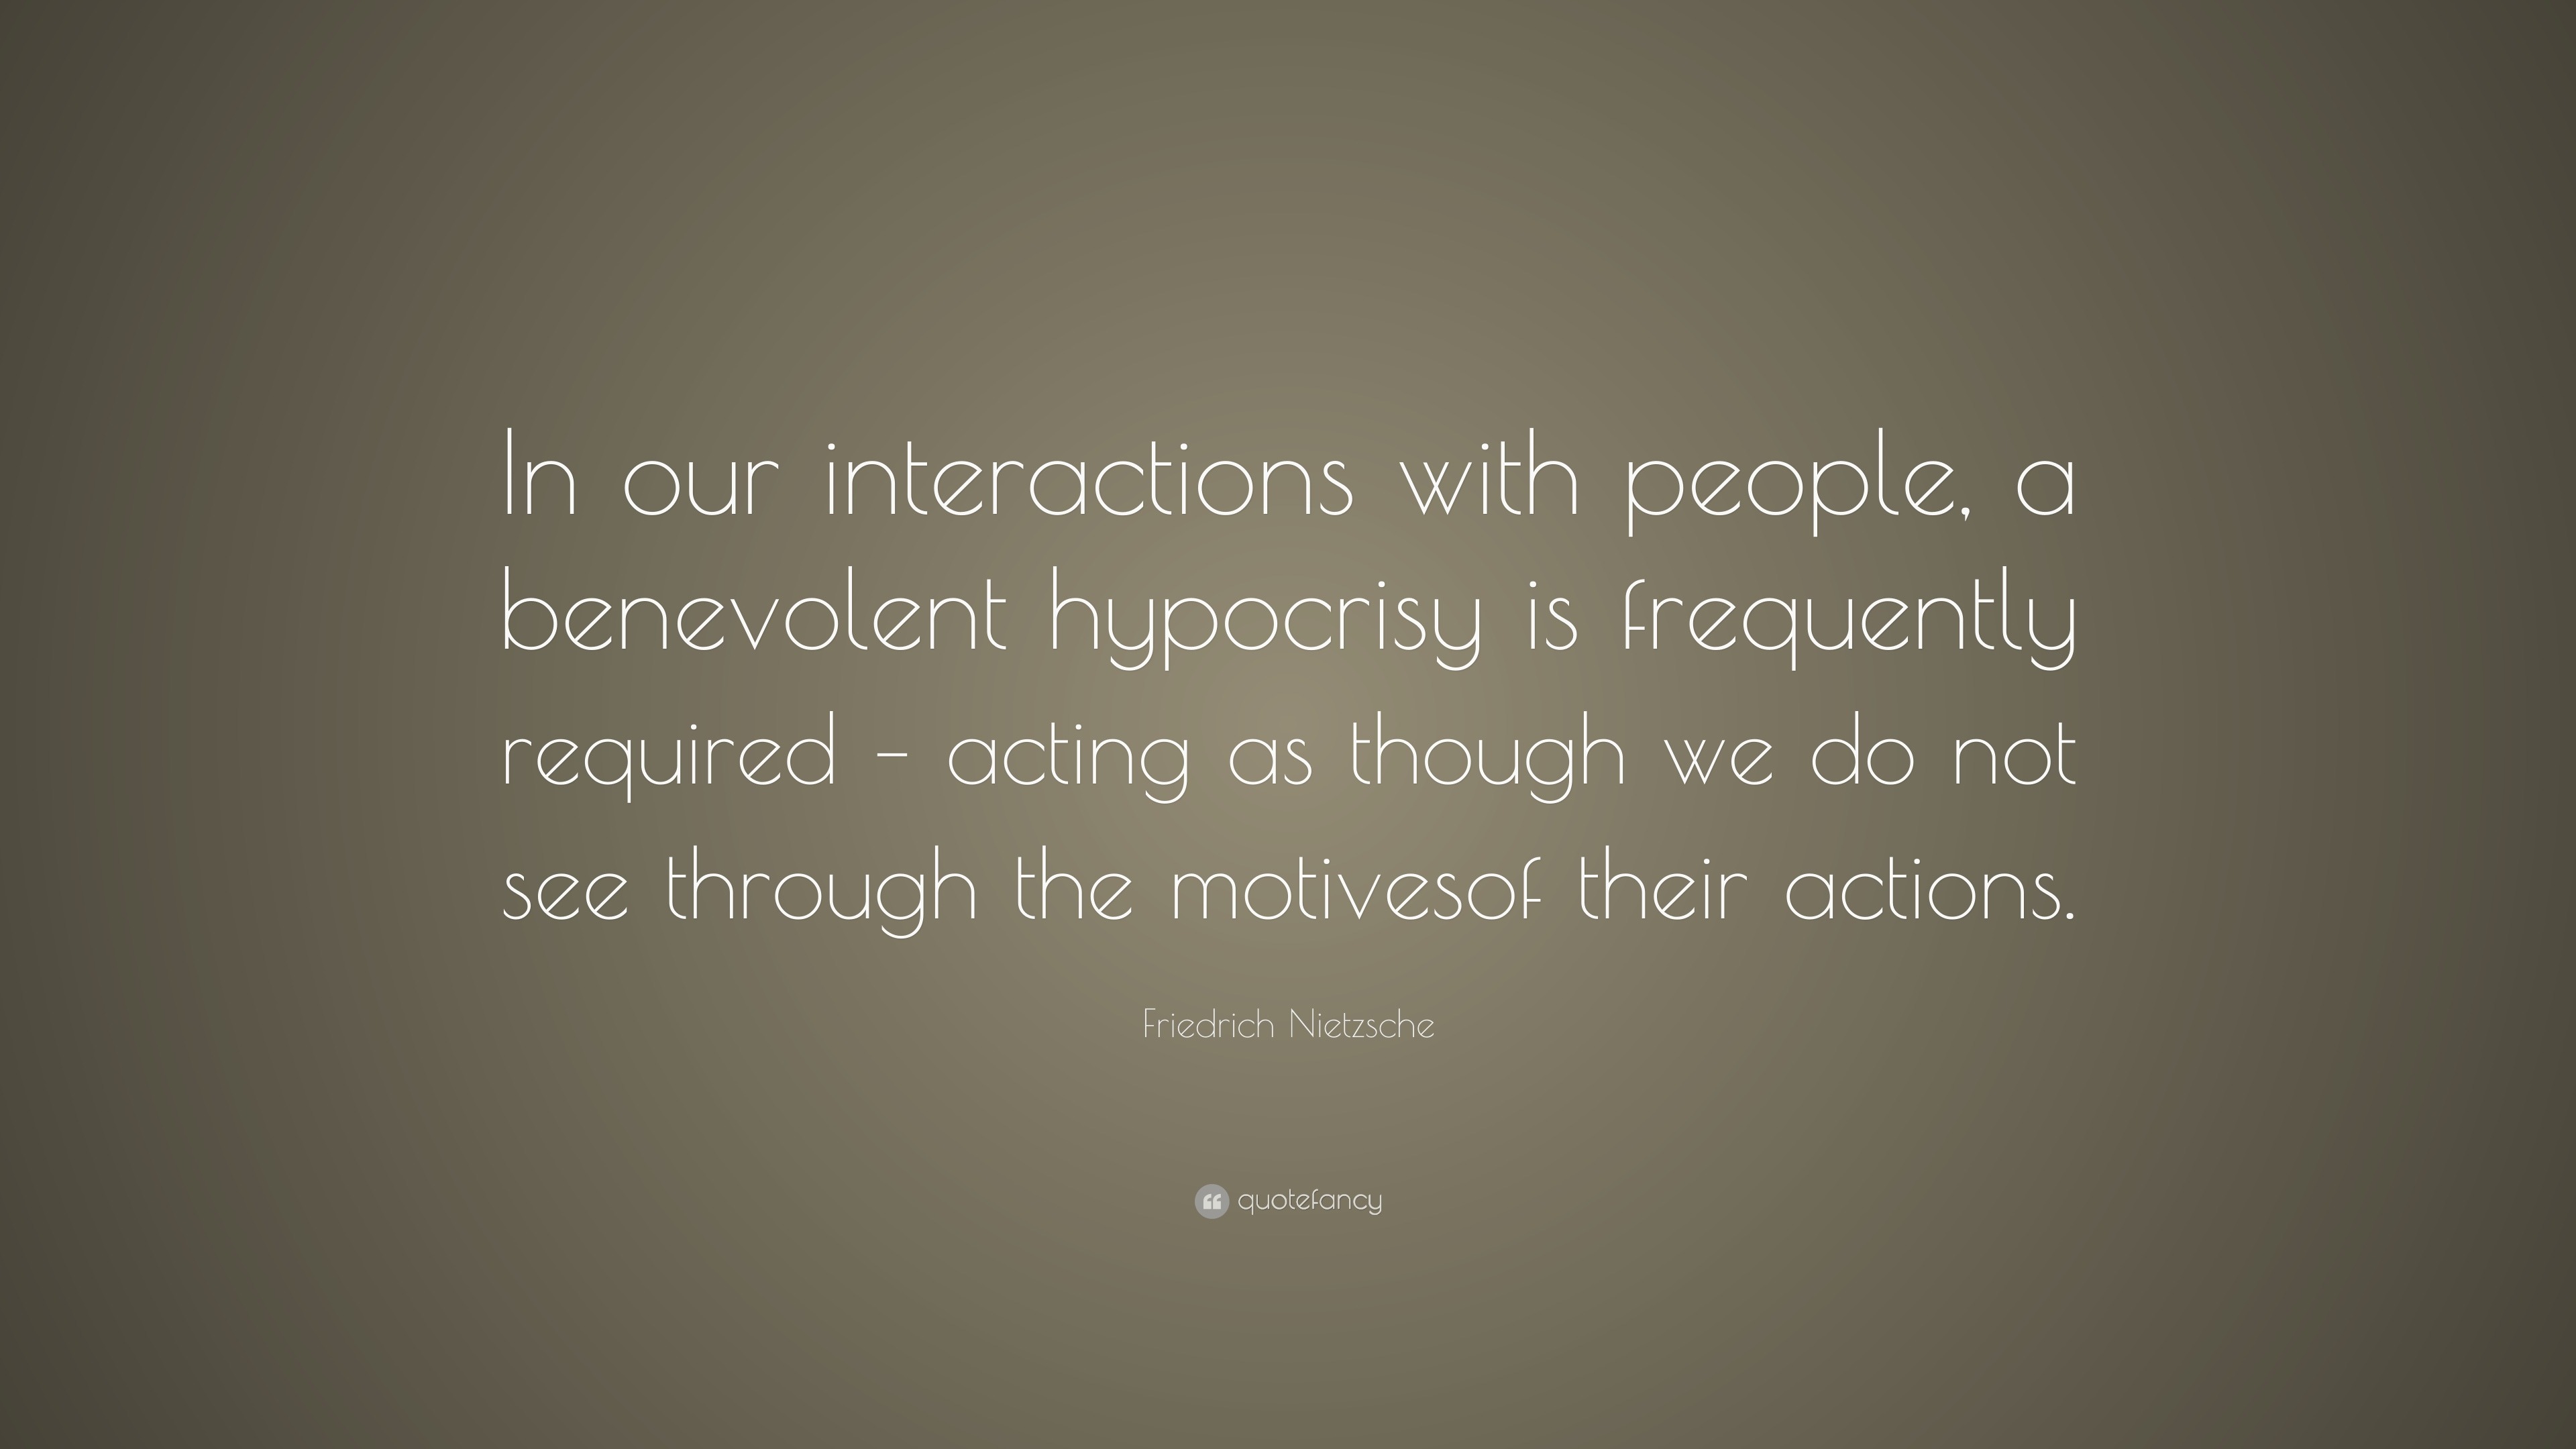 Friedrich Nietzsche Quote: “In our interactions with people, a ...